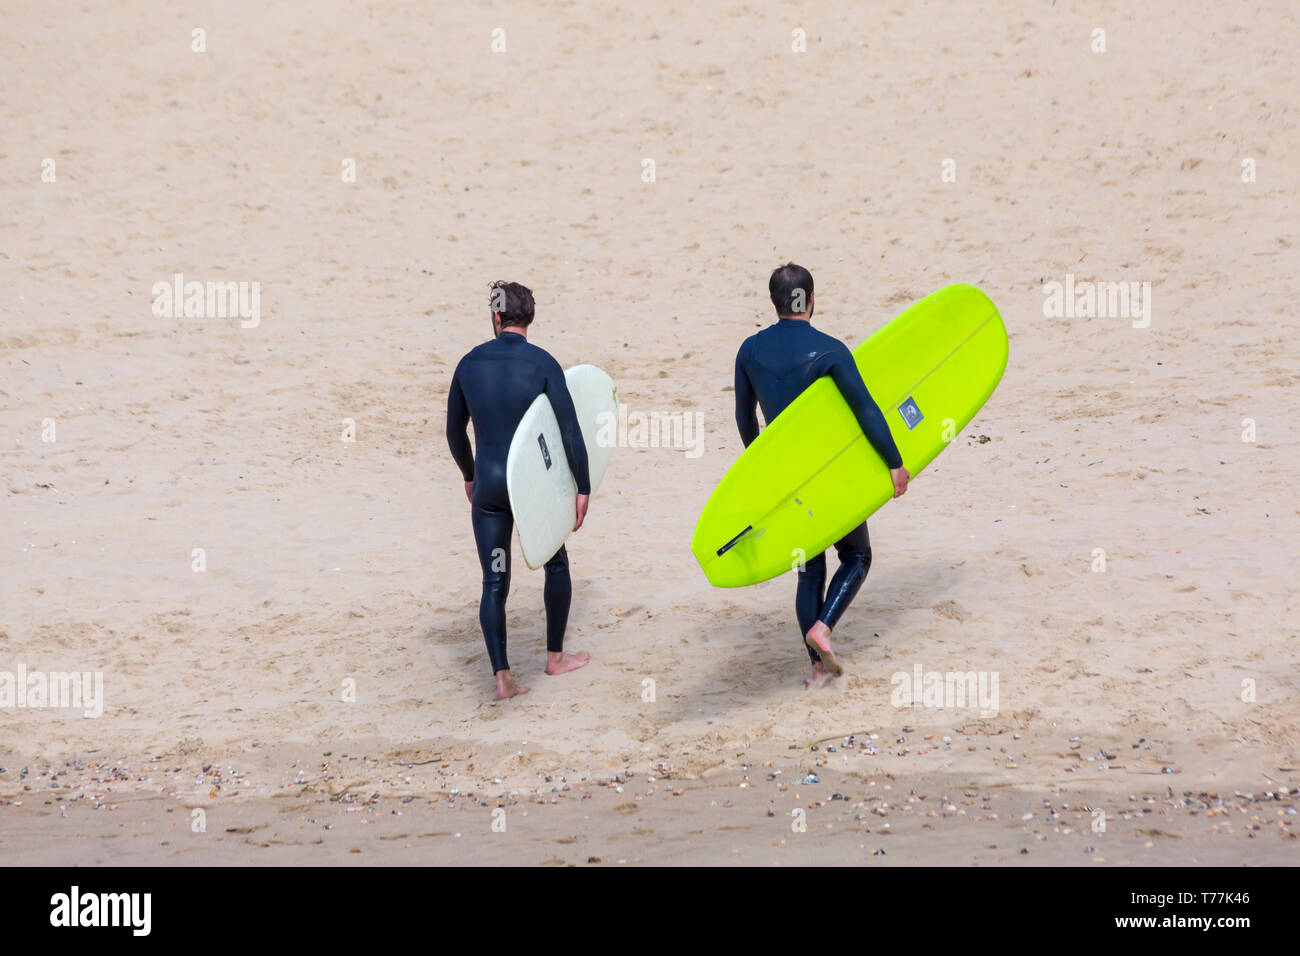 Bournemouth, Dorset, UK. 5th May 2019. UK weather: sunshine, but cool for the morning at Bournemouth beaches and mainly empty in stark contrast to the last Bank Holiday weekend.  Surfers on the beach.  Credit: Carolyn Jenkins/Alamy Live News Stock Photo